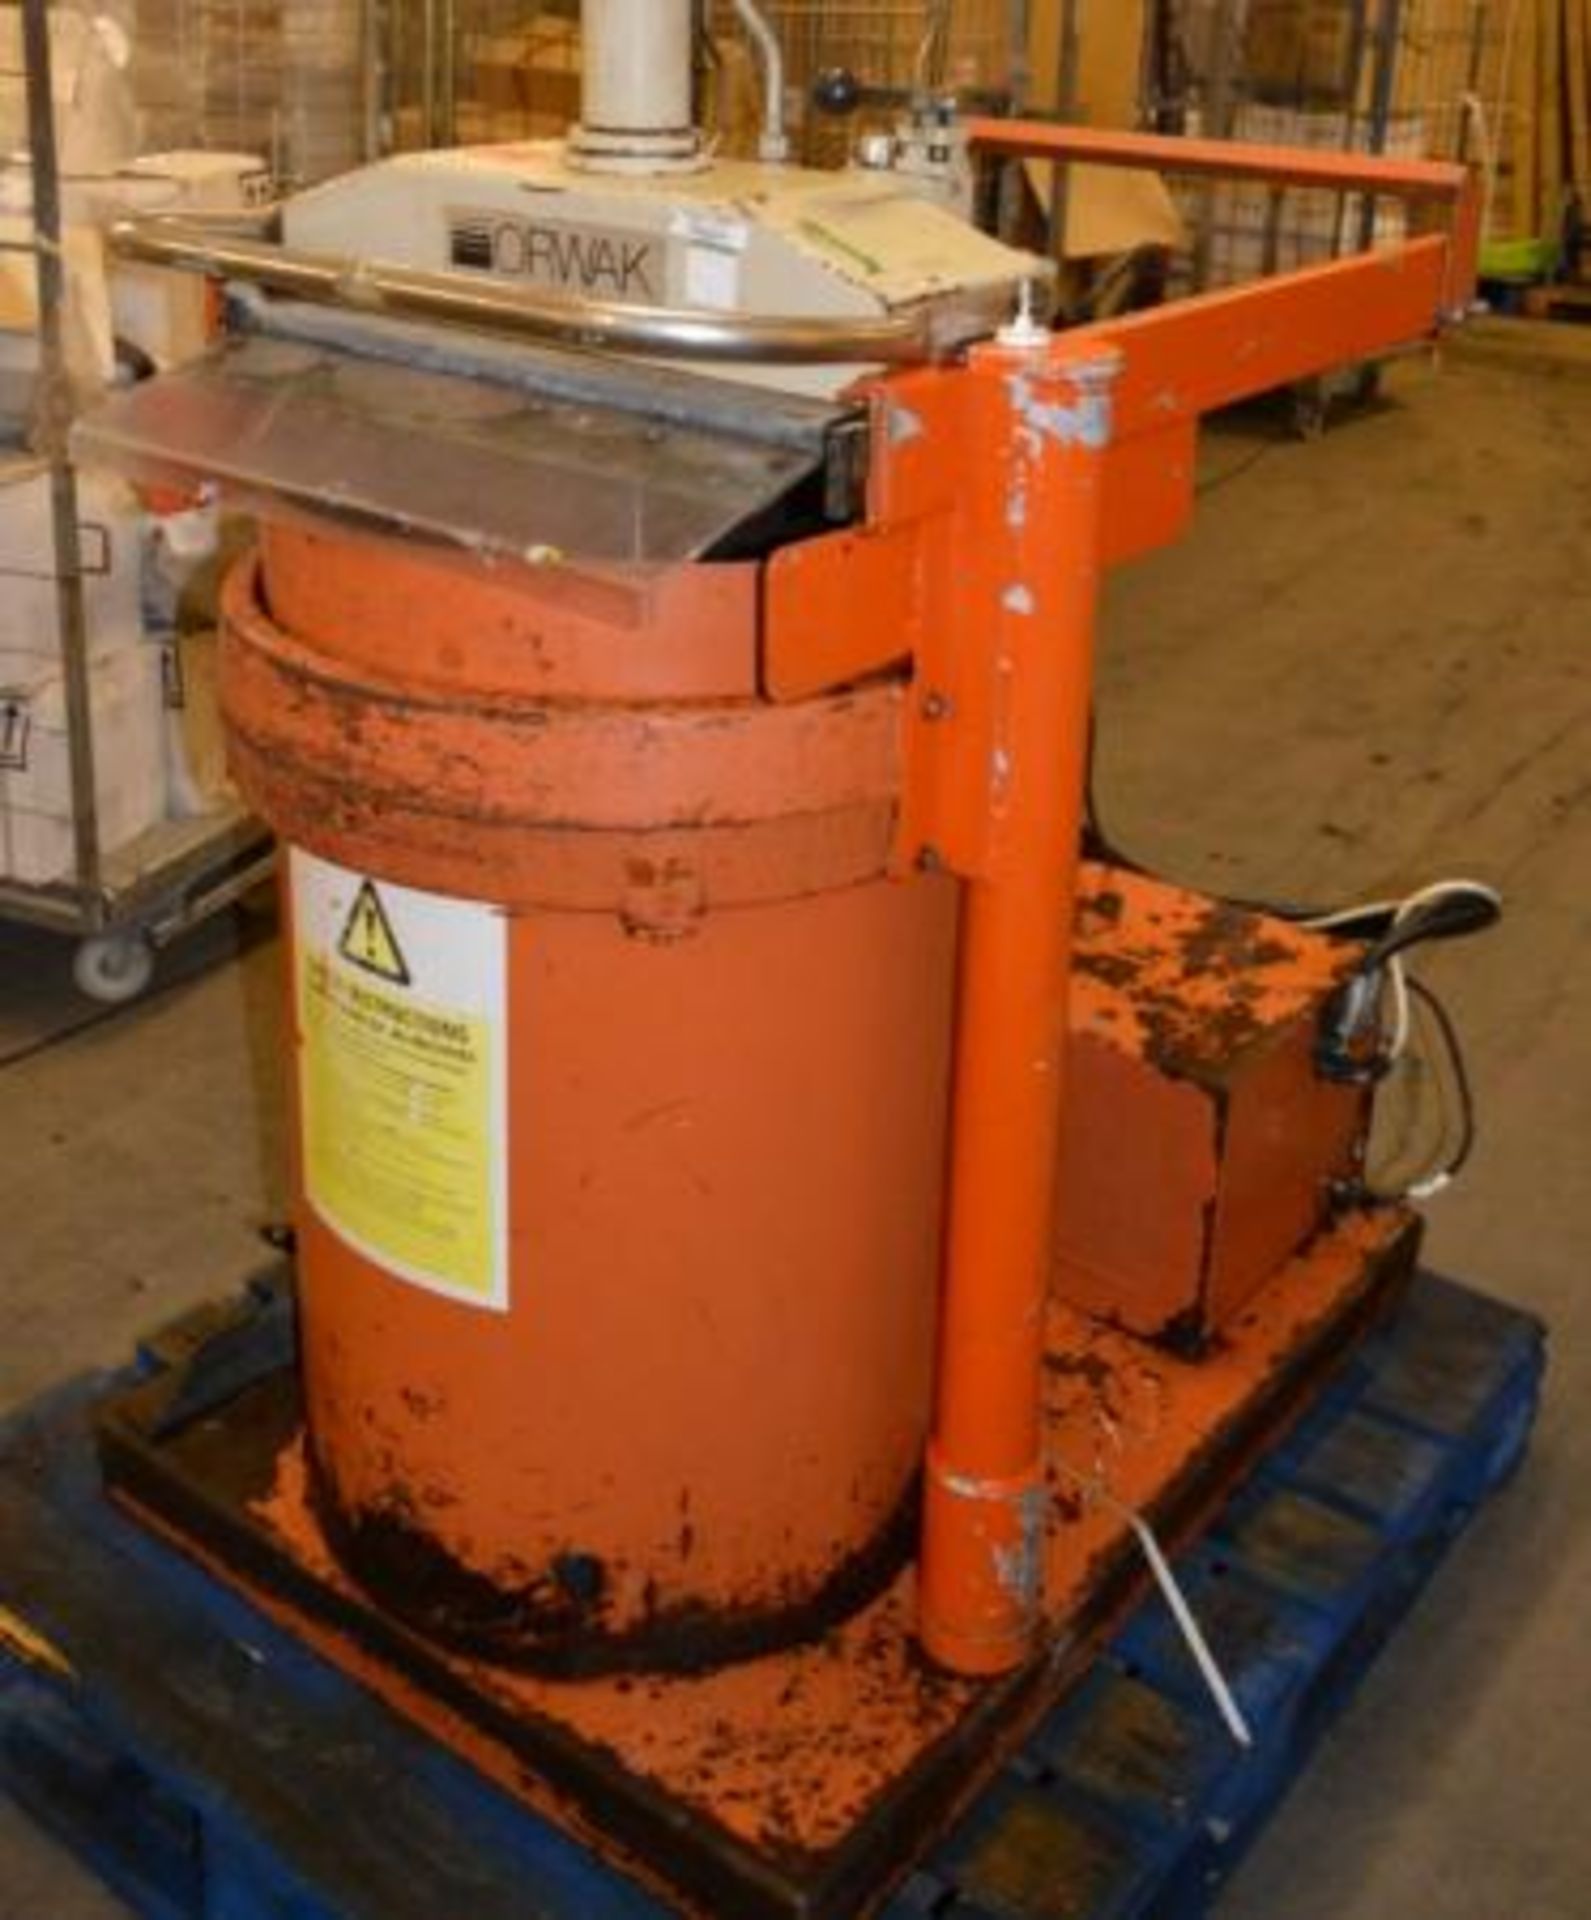 1 x Orwak 5030 Waste Compactor Bailer - Used For Compacting Recyclable or Non-Recyclable Waste - Image 3 of 4